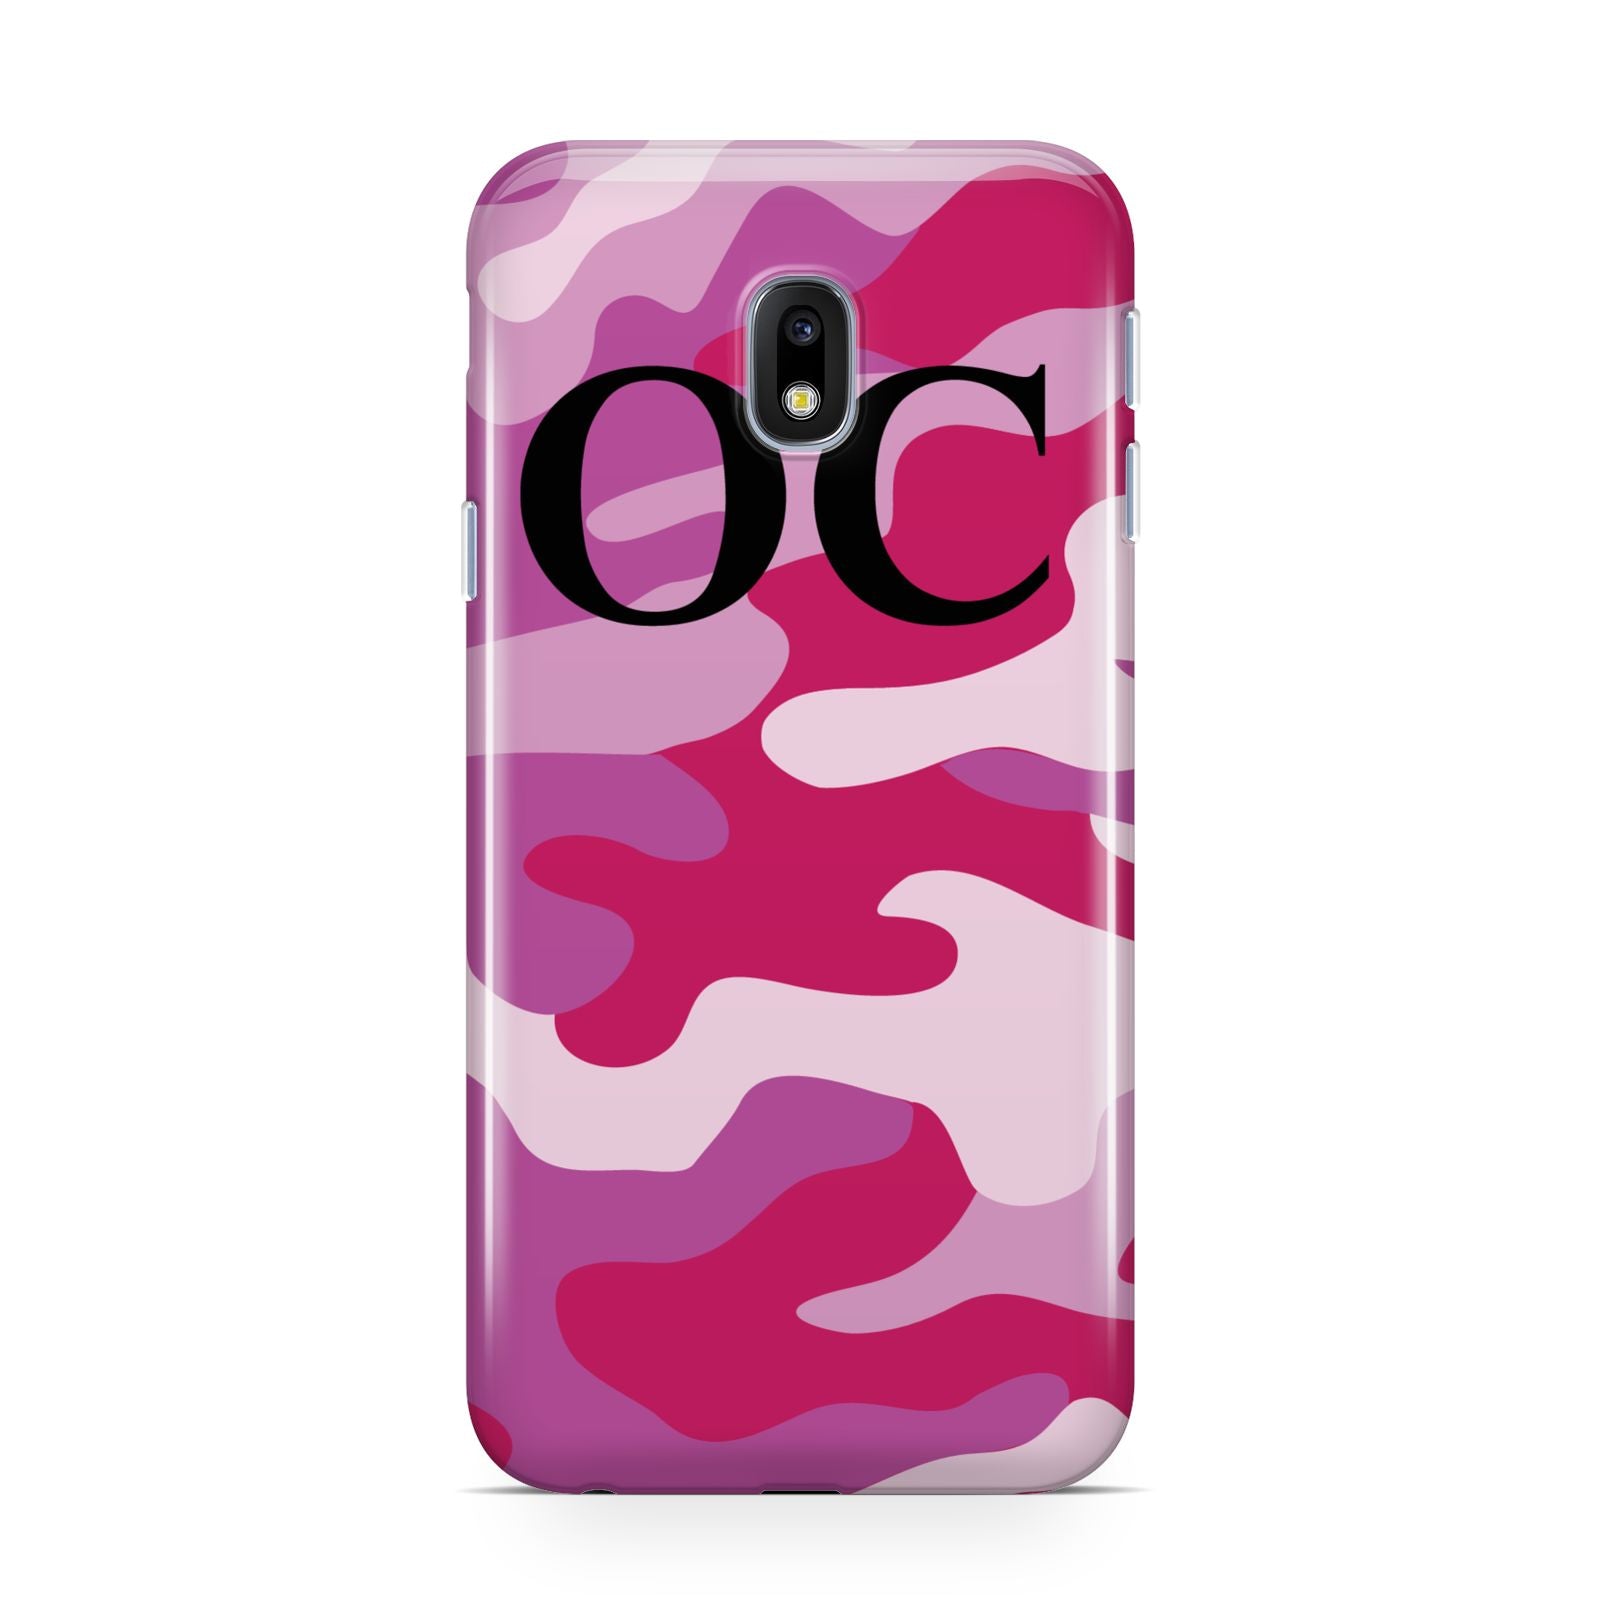 Camouflage Personalised Samsung Galaxy J3 2017 Case